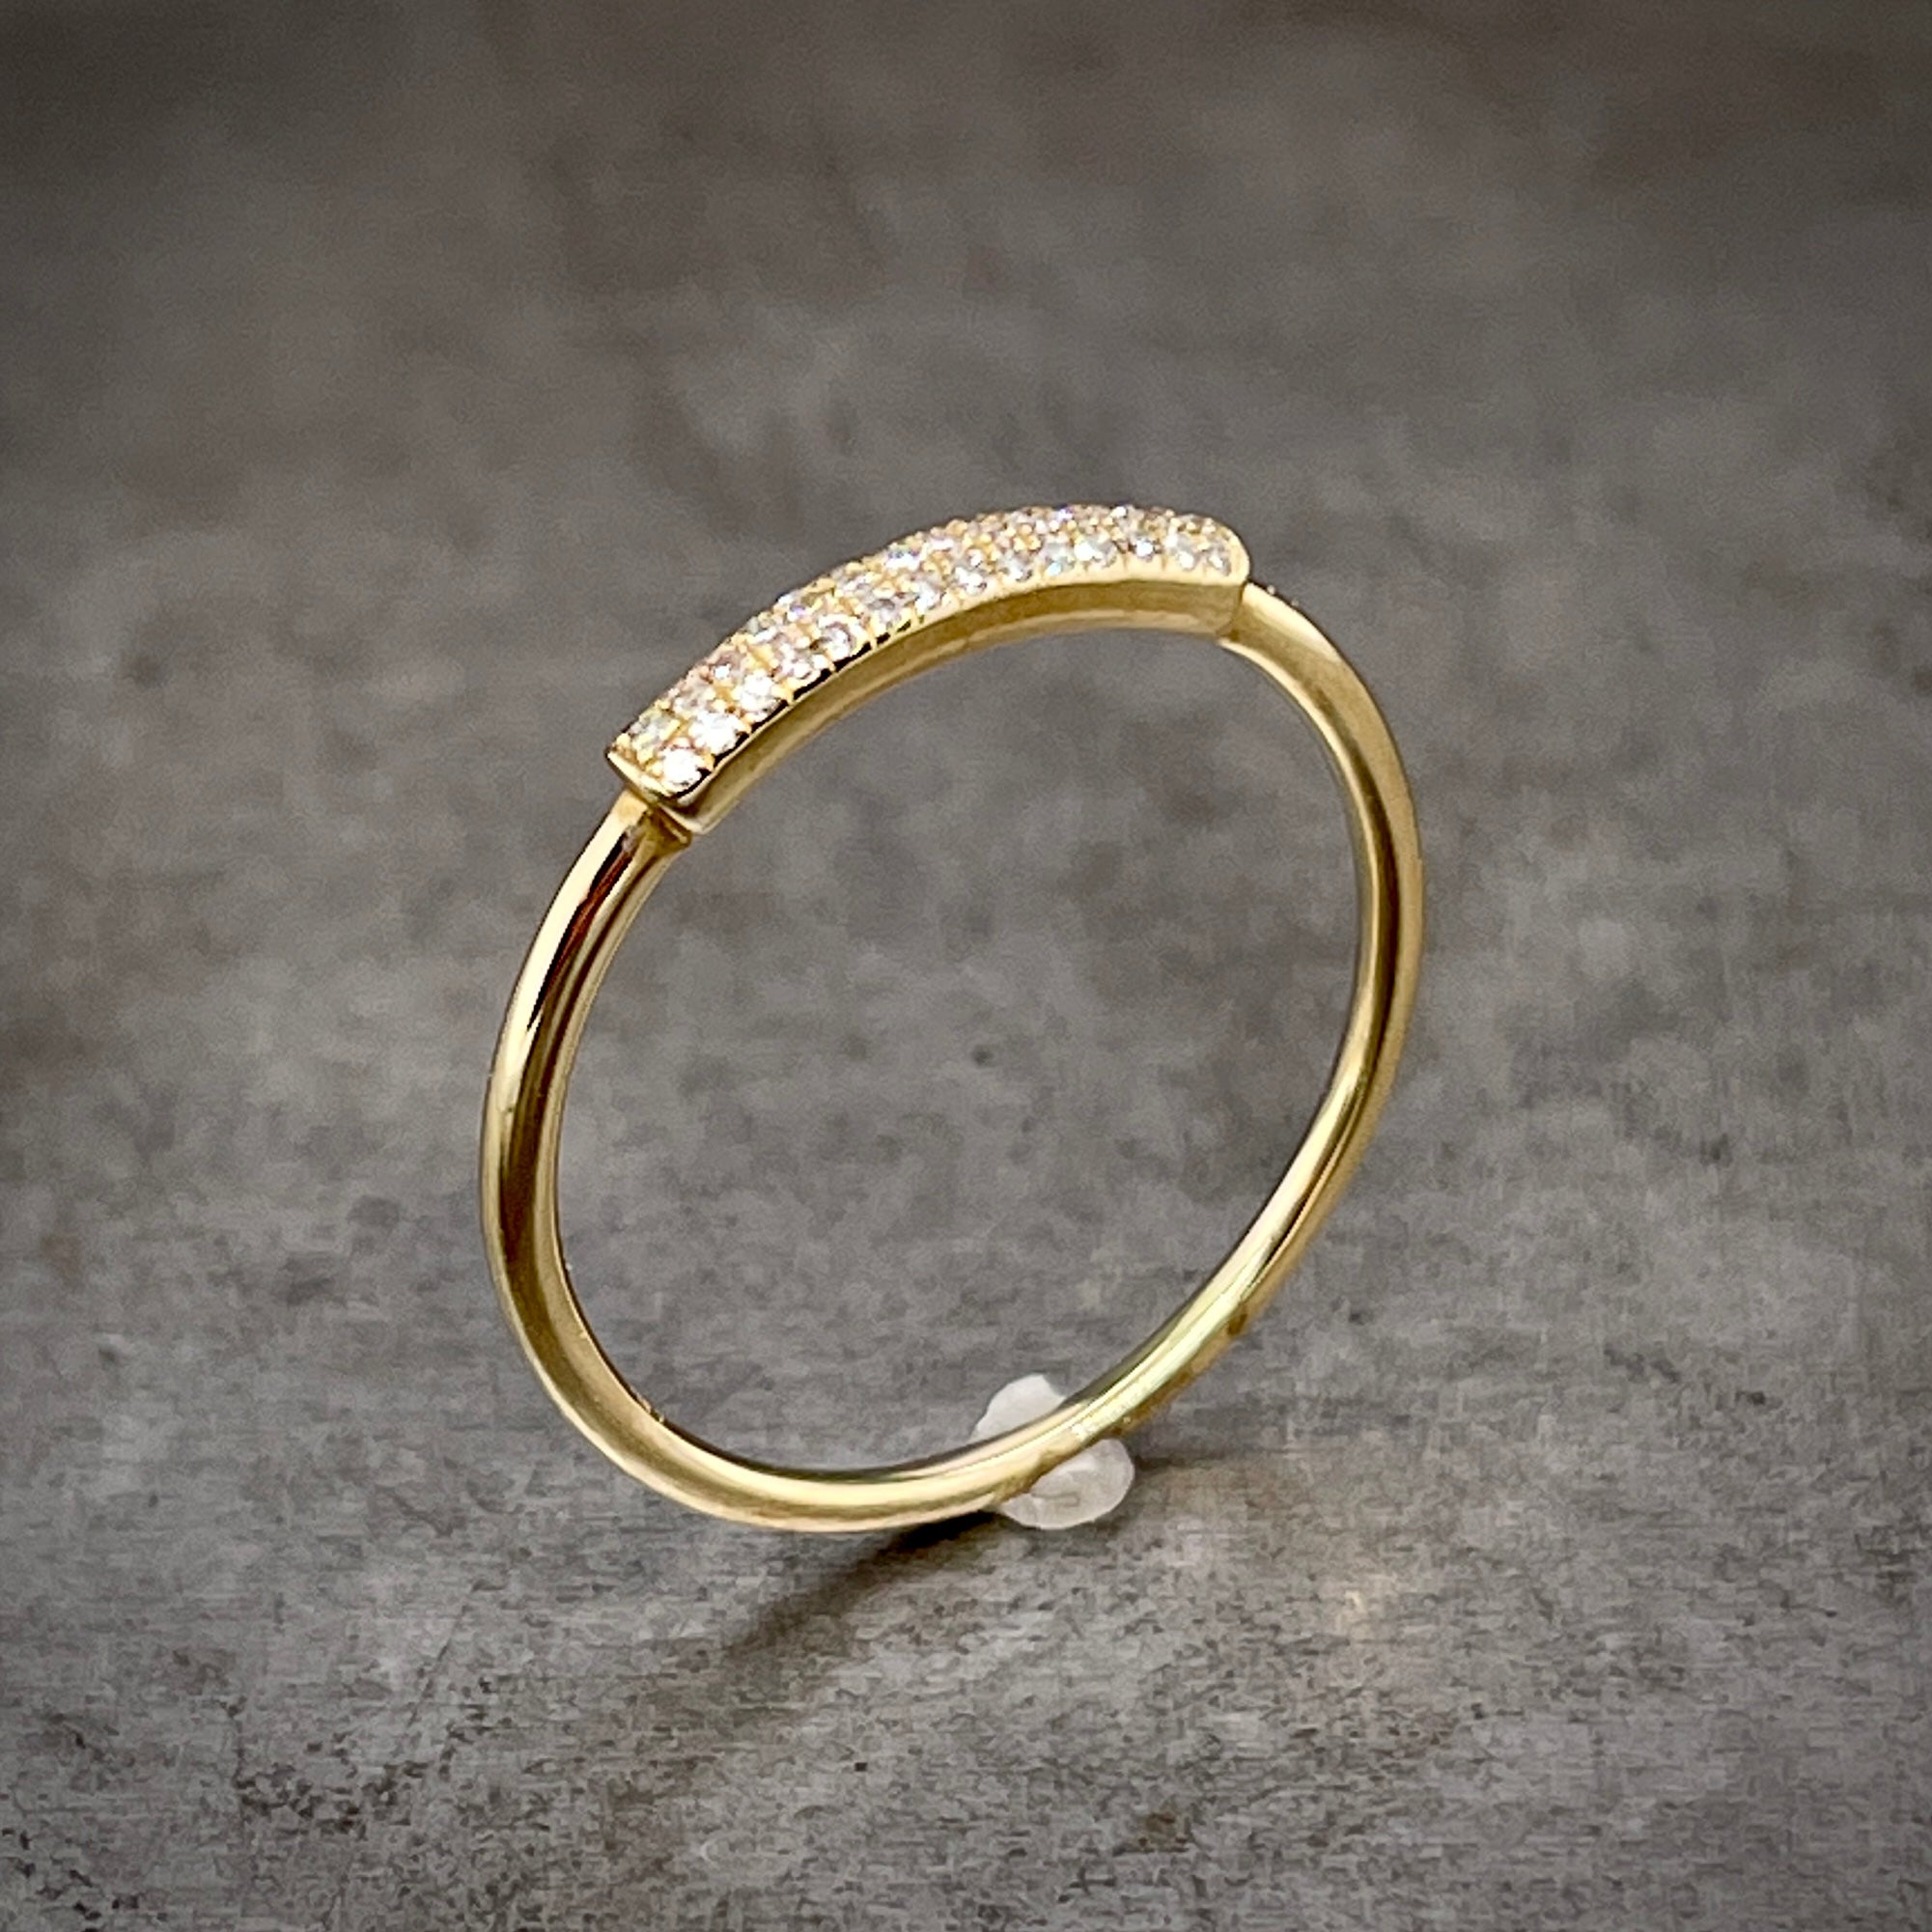 Angled aerial view of diamond and gold band.